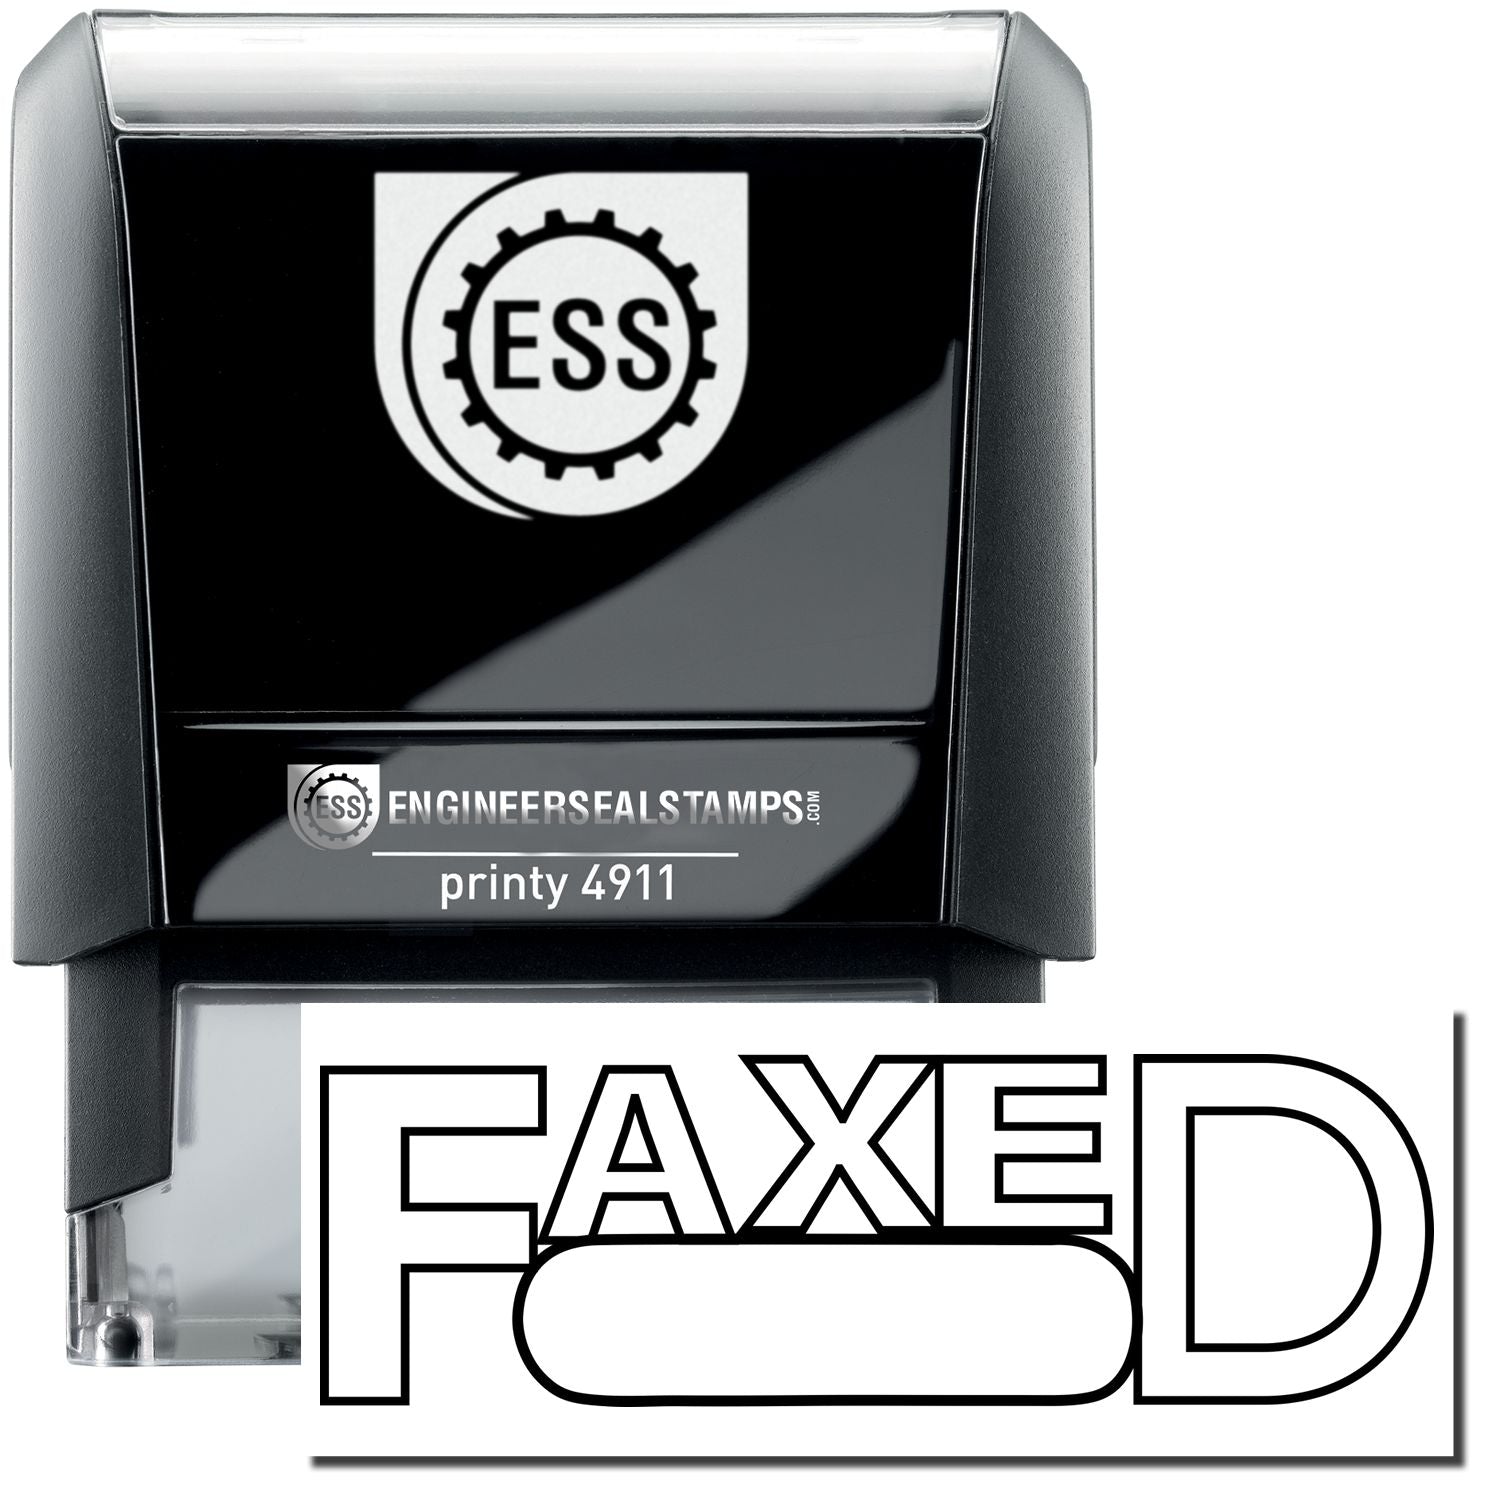 A self-inking stamp with a stamped image showing how the text "FAXED" in an outline style with a round date box is displayed after stamping.